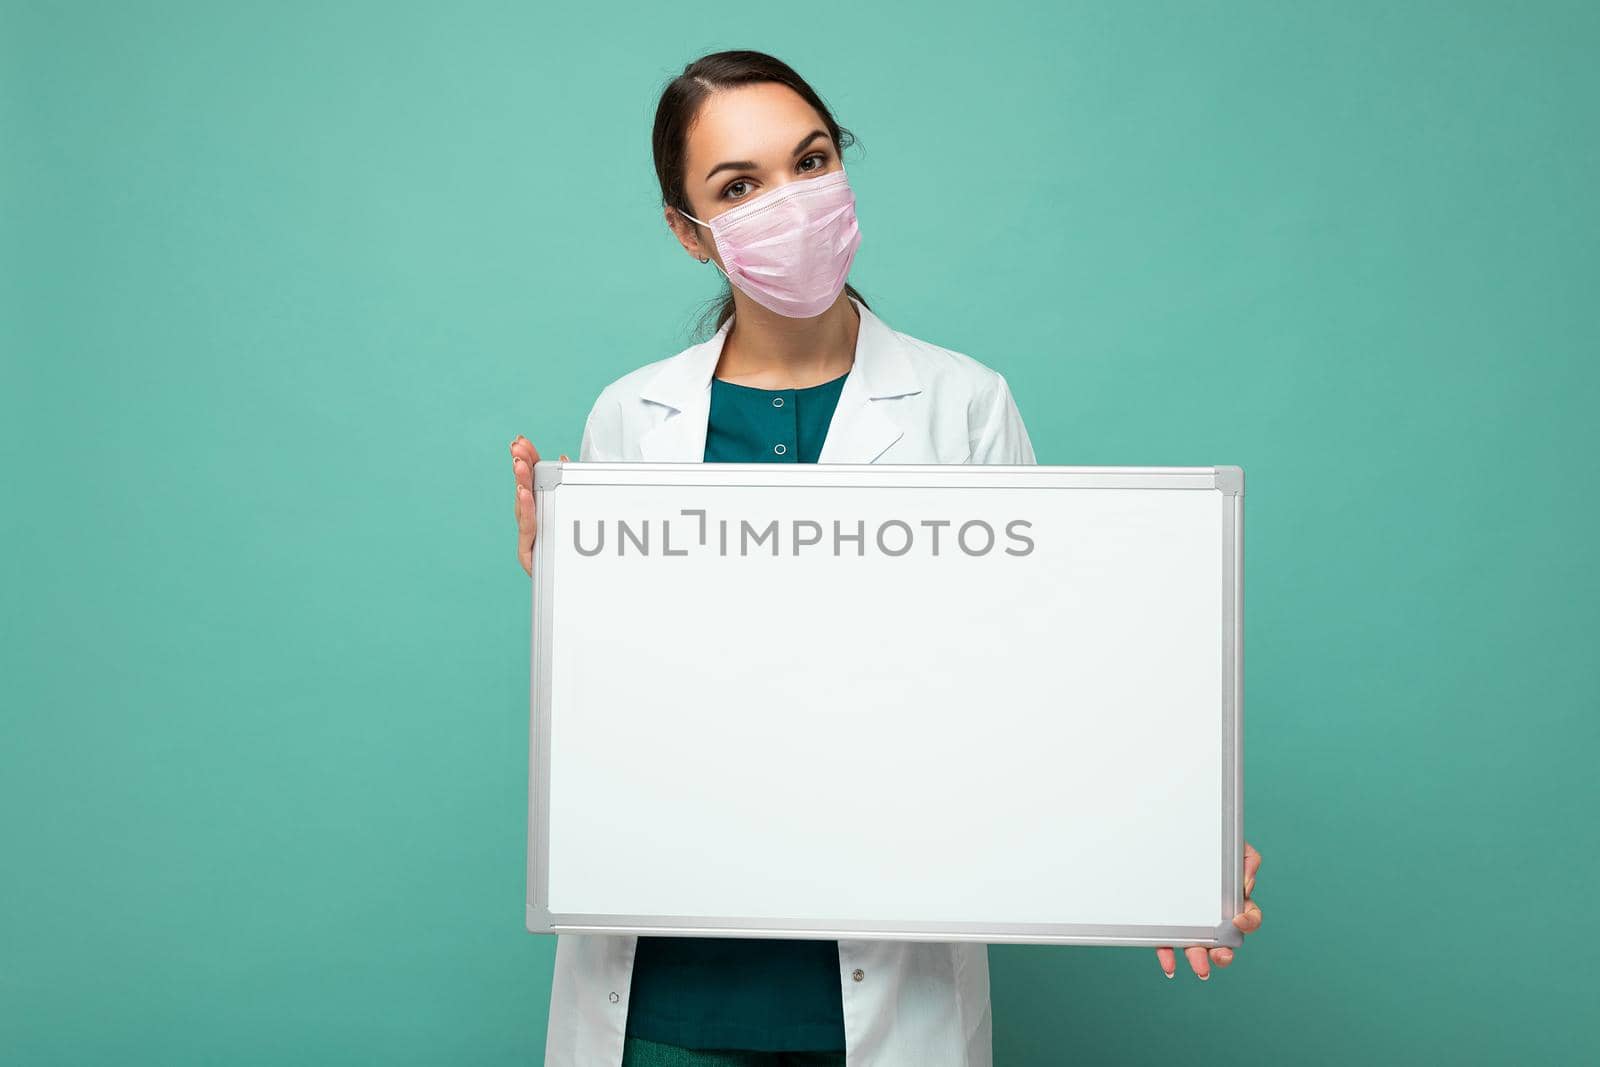 Woman doctor wearing a white medical coat and a mask holding blank board with copy space for text isolated on background. Coronavirus concept.